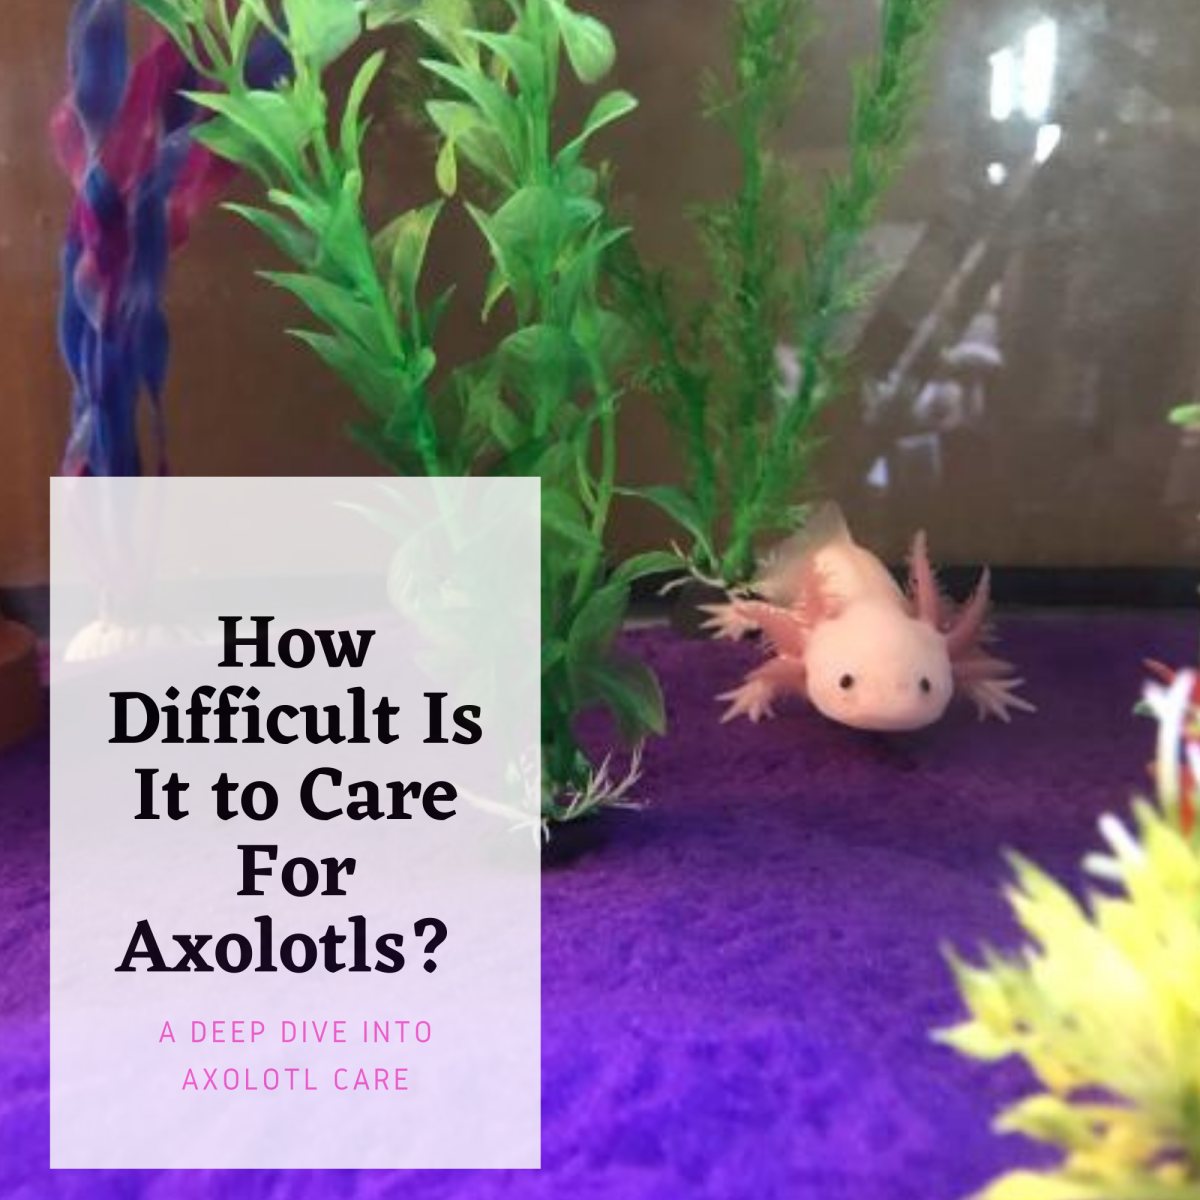 How Difficult Is It to Care for Axolotls?